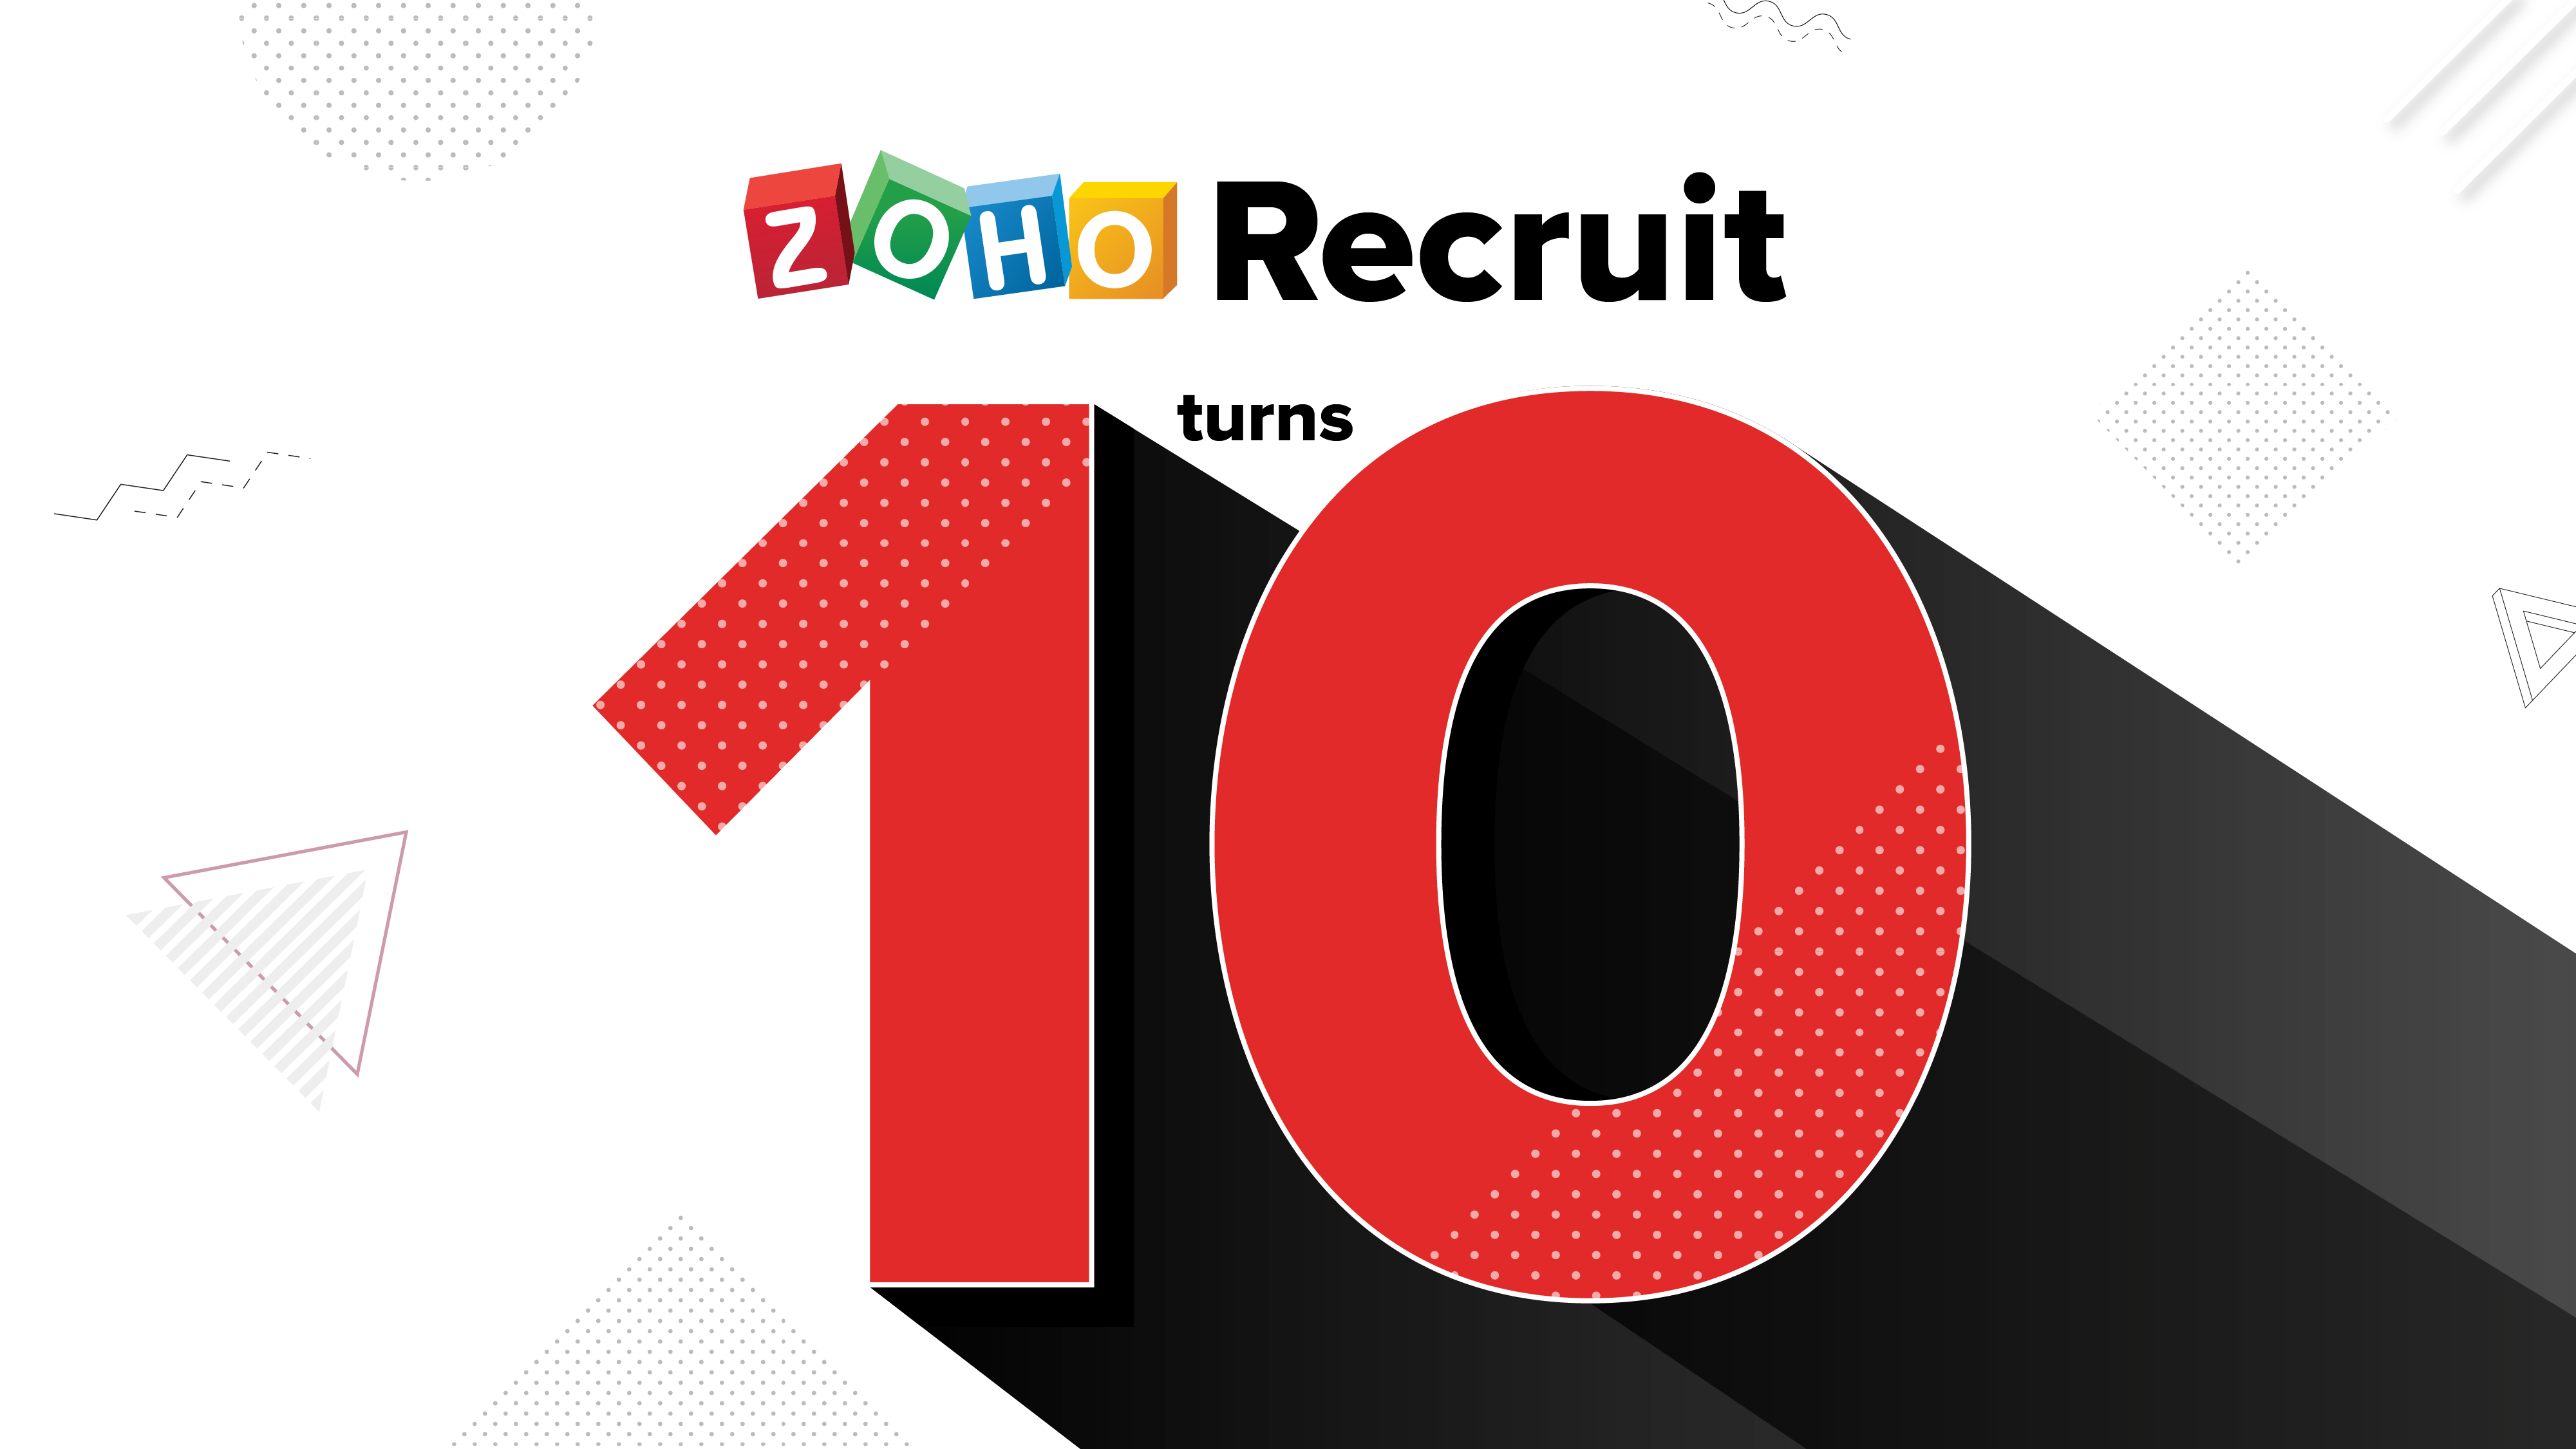 The all-new Zoho Recruit: better processes, better sourcing, and better hires